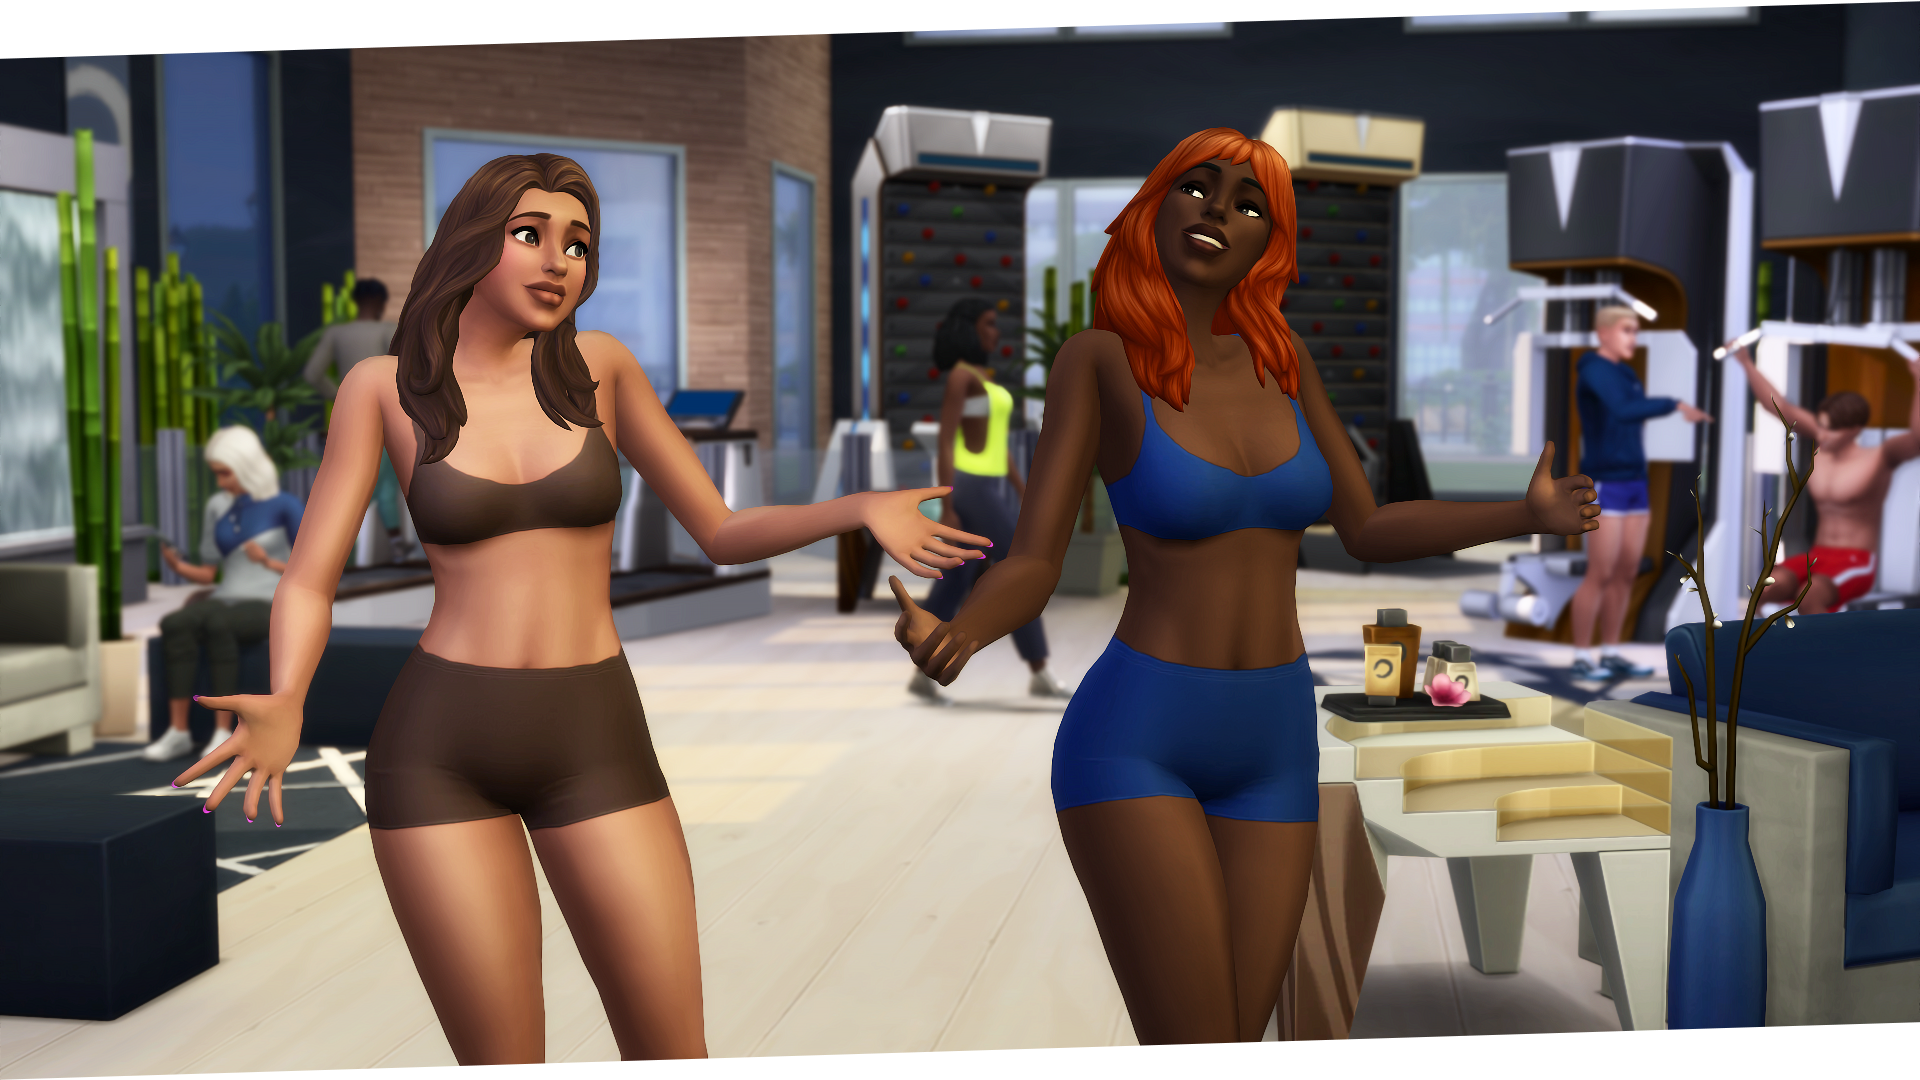 The Sims Resource - Default Replacement Underwear Top and Bottom (Bra /  Panties)